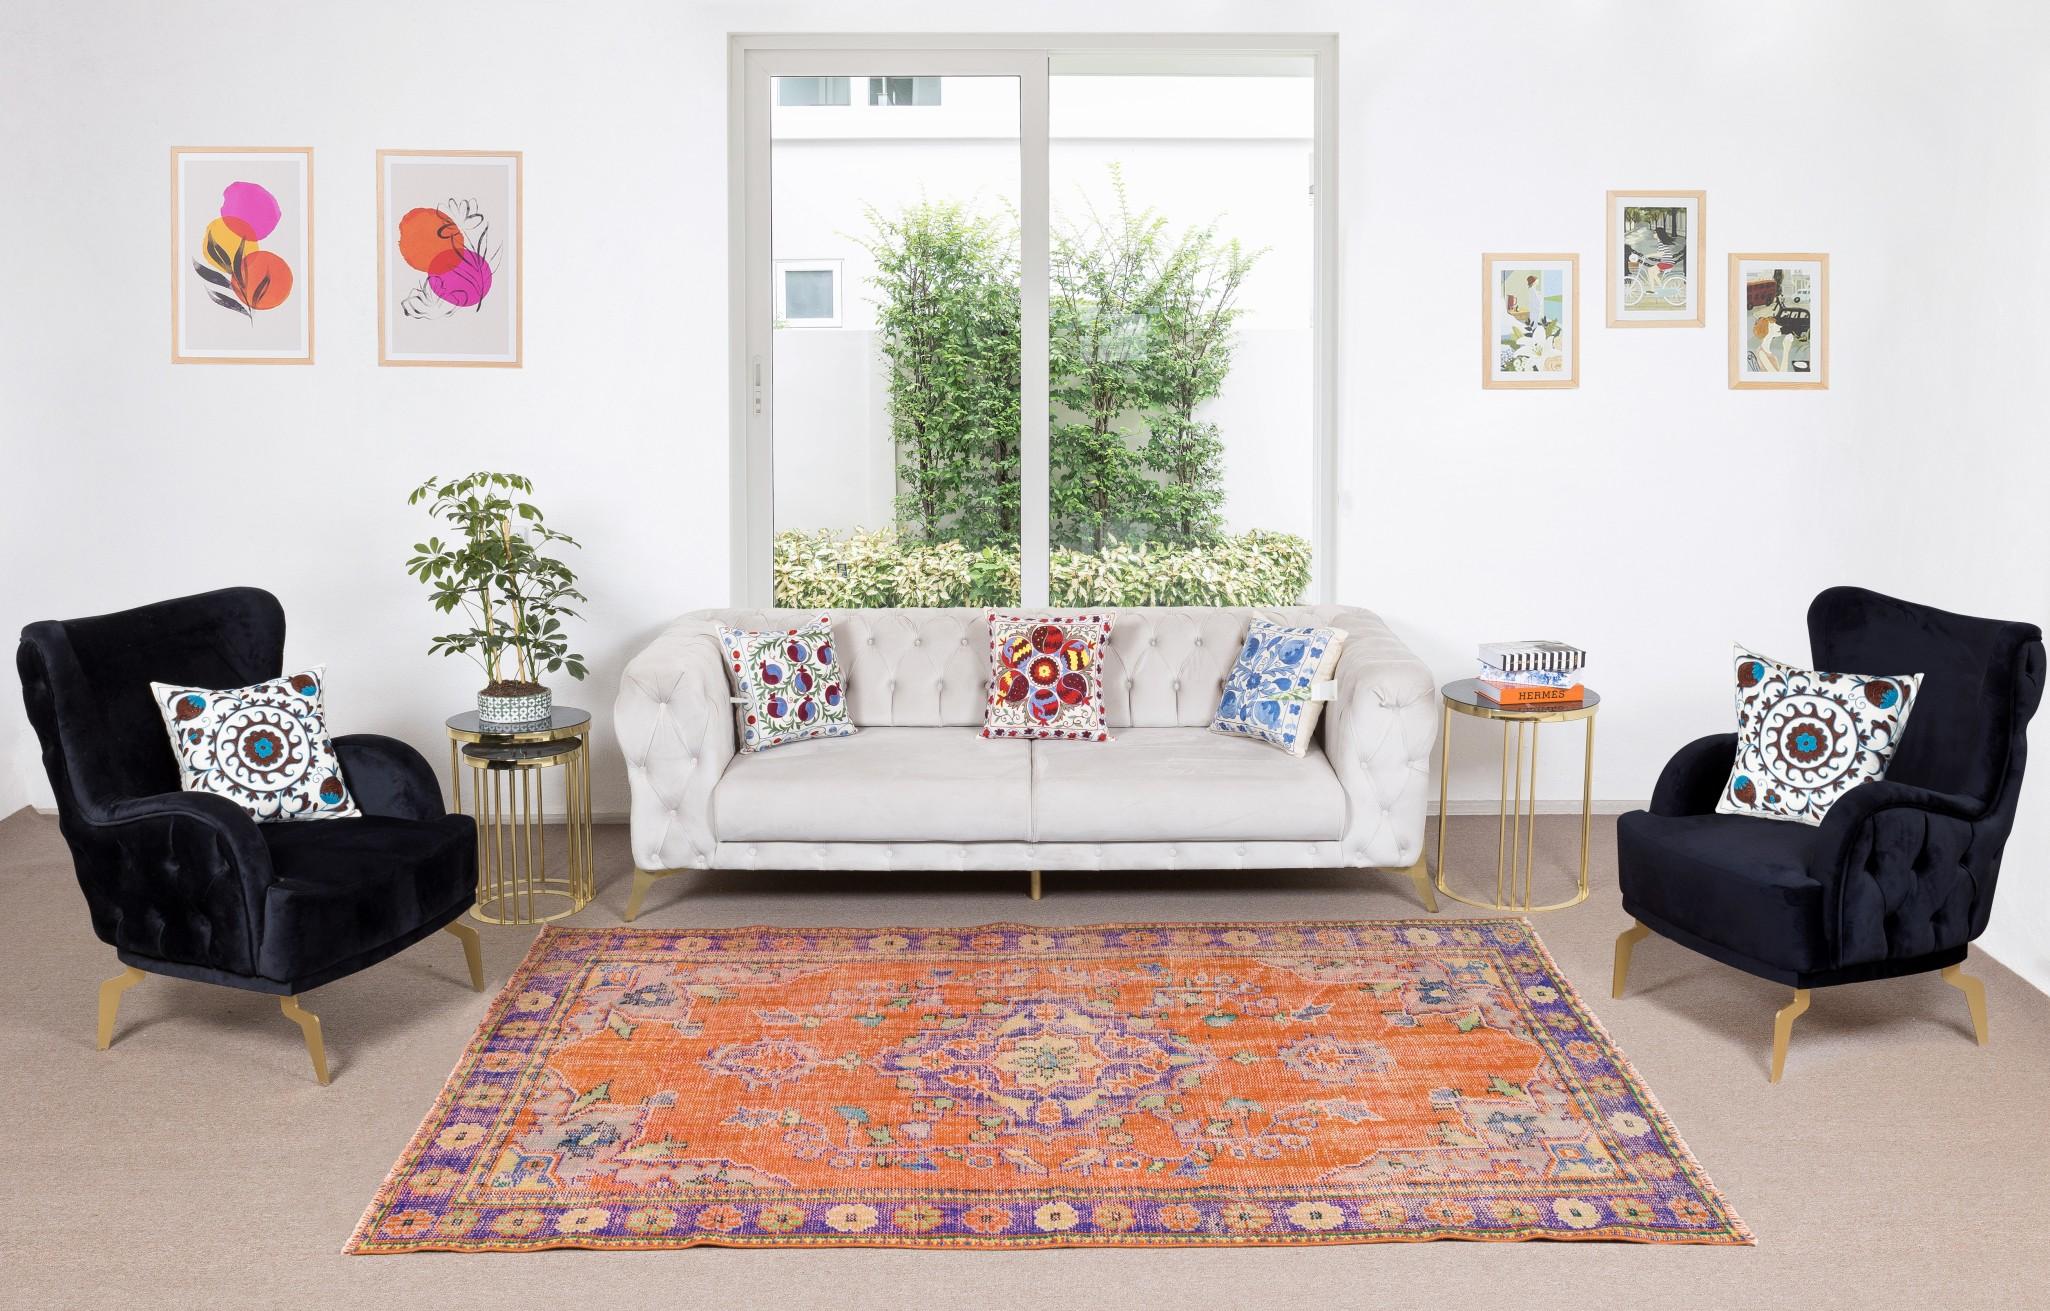 A finely hand-knotted vintage Central Anatolian rug from 1960s. The rug has even low wool pile on cotton foundation. It is heavy and lays flat on the floor, in very good condition with no issues. It has been washed professionally, The rug is sturdy